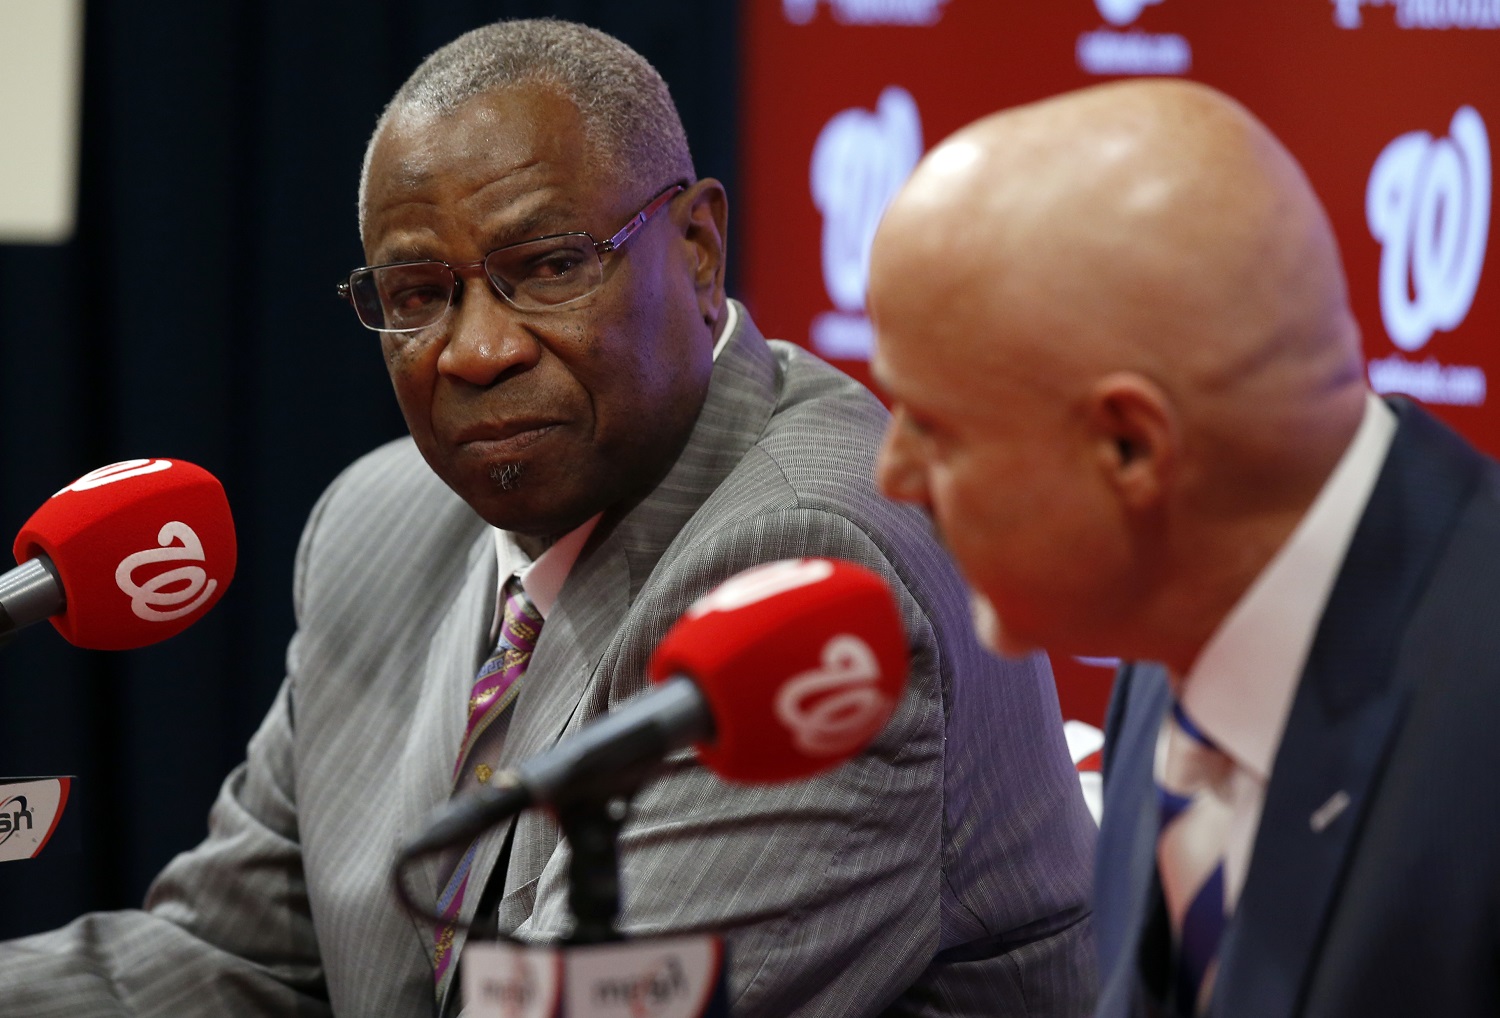 Dusty Baker, left, listens as general manager Mike Rizzo speaks during a news conference to present Baker as the new manager of the Washington Nationals baseball team, Thursday, Nov. 5, 2015, in Washington. (AP Photo/Alex Brandon)